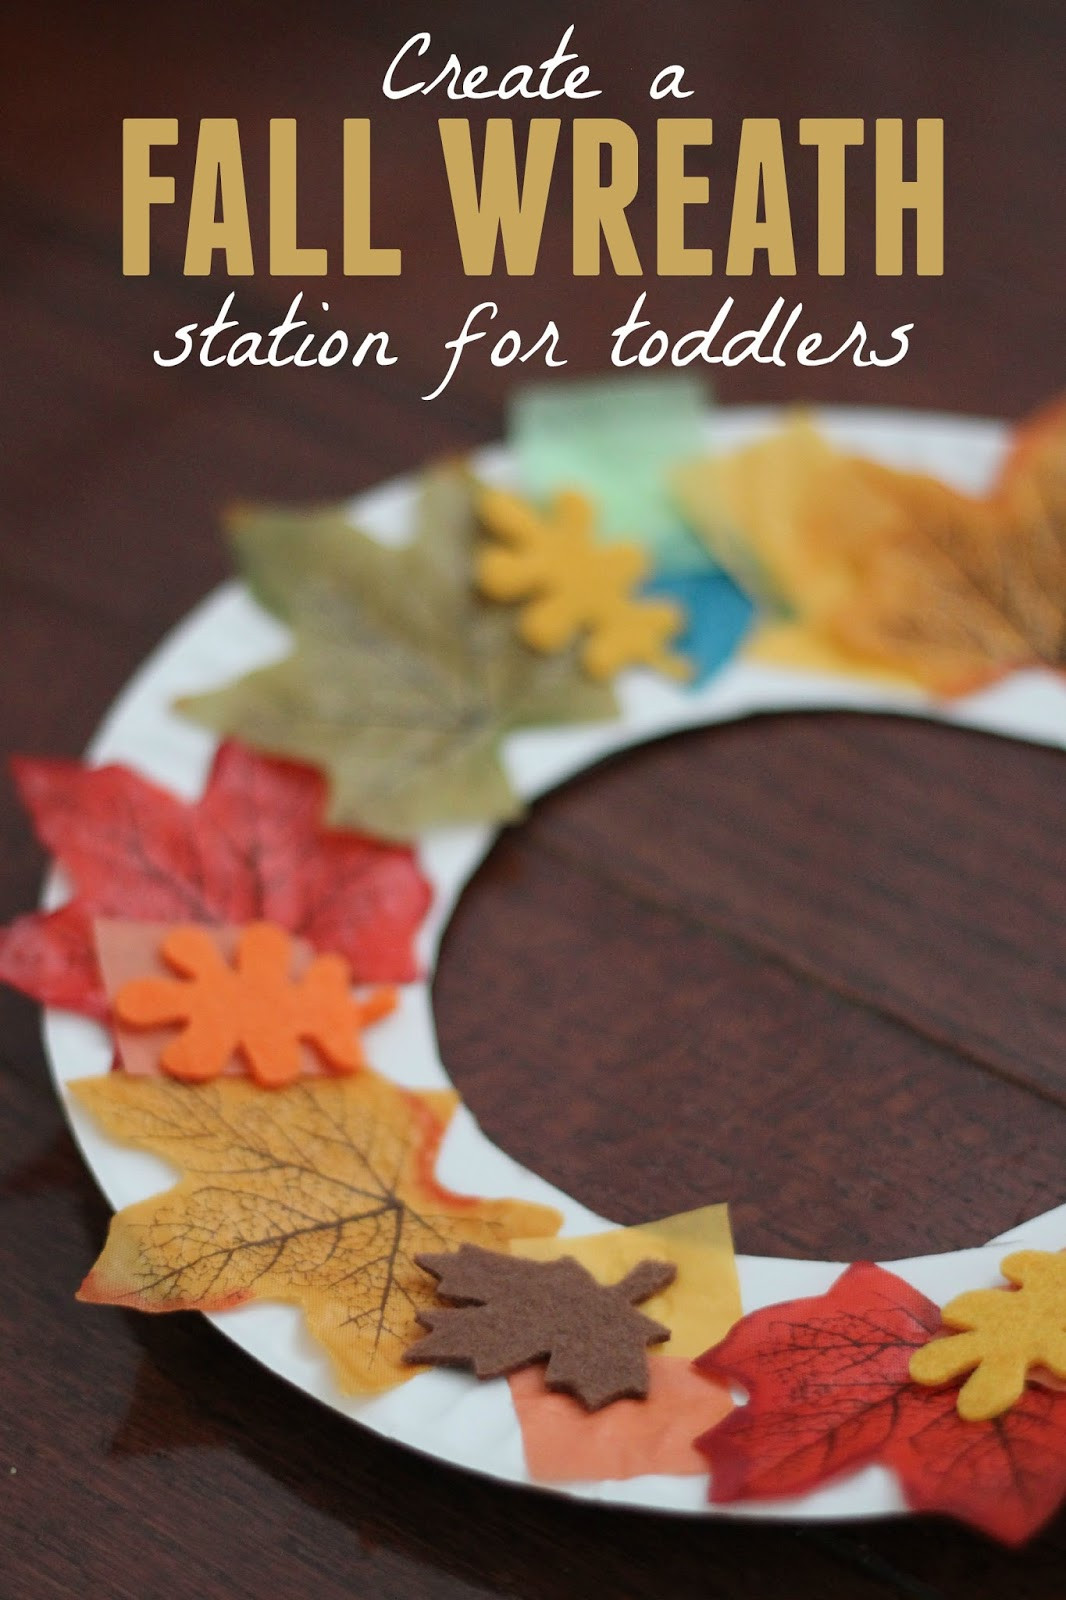 Crafts For Young Toddlers
 Toddler Approved Fall Wreath Making Station for Toddlers